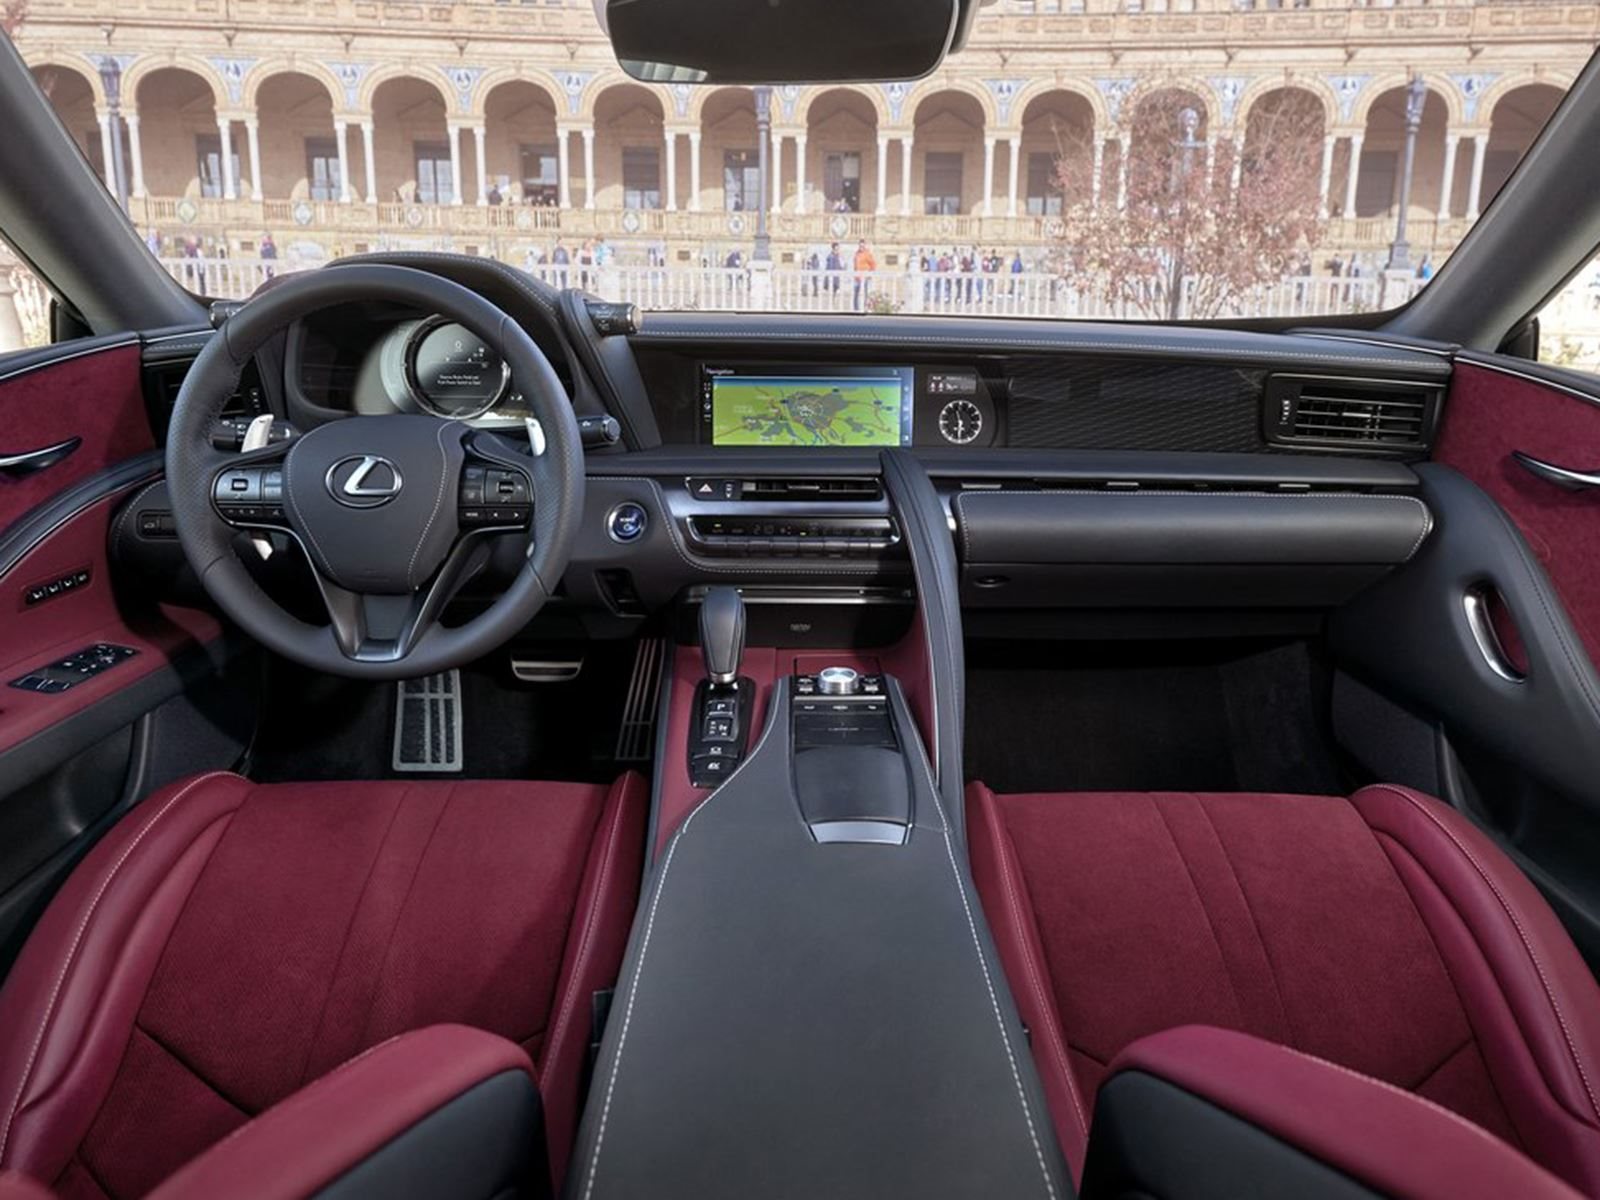 Alcantara Is So Popular In Car Interiors, The Company Can't Keep Up